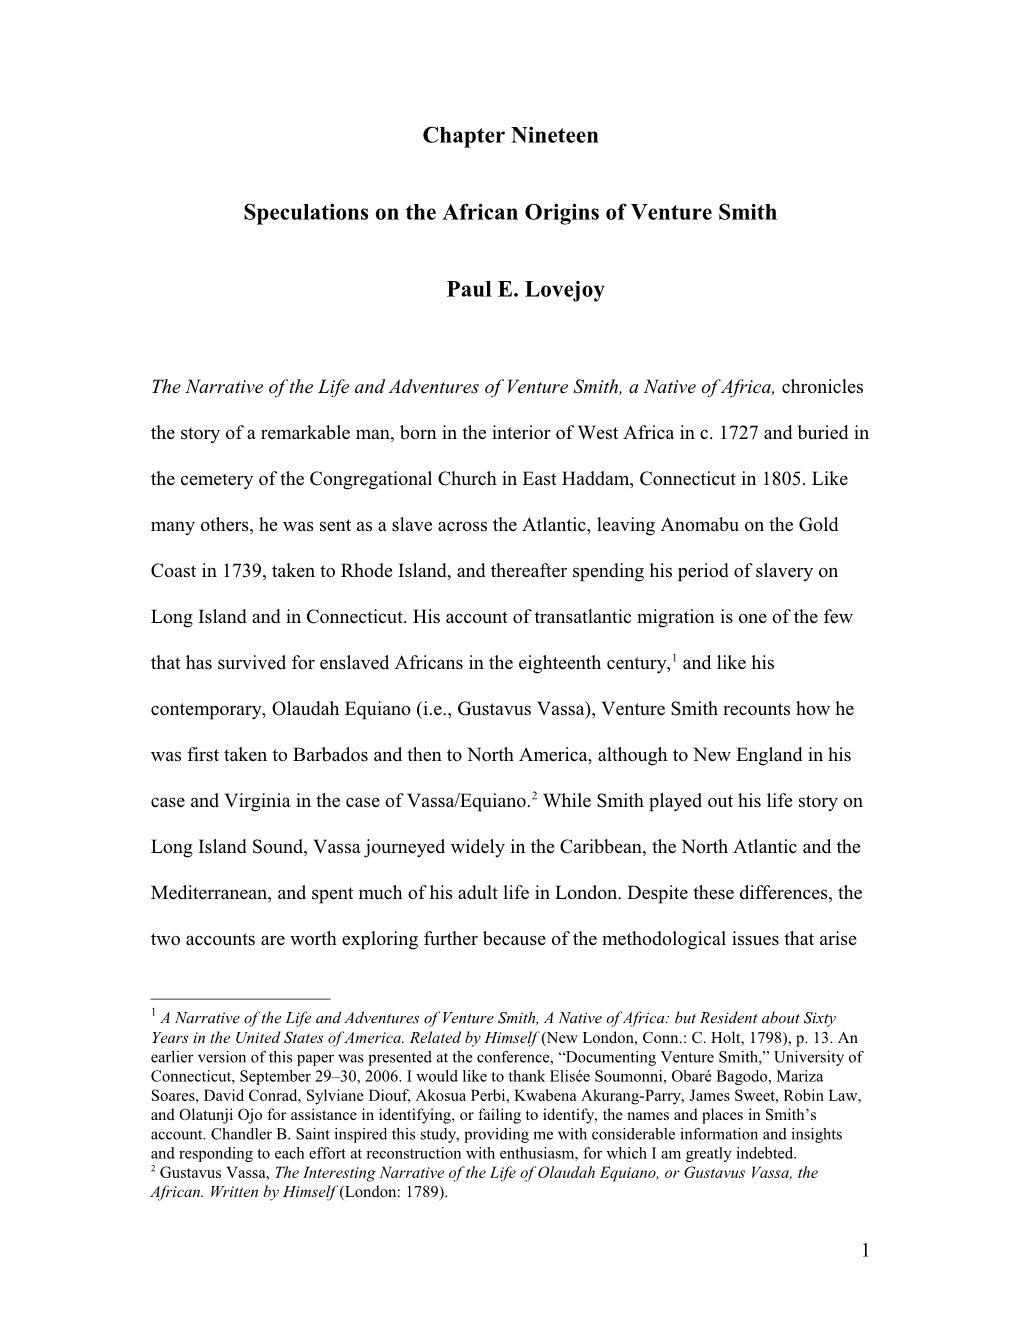 Speculations on the African Origins of Venture Smith